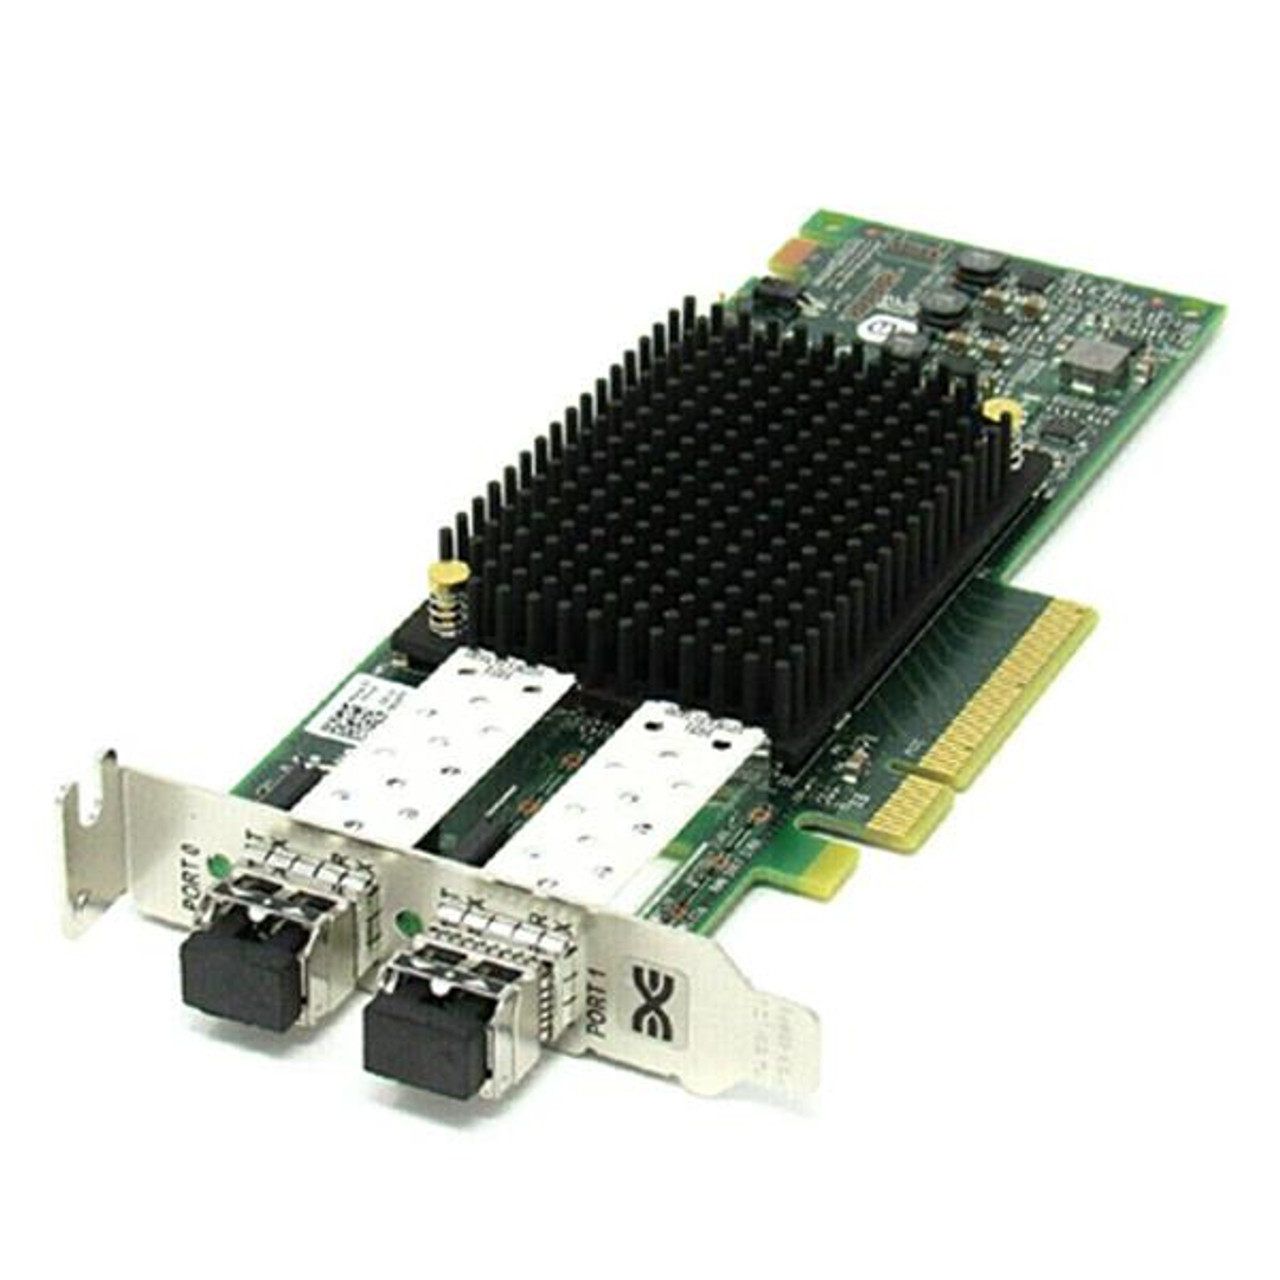 LPE32002-M2 Dell Dual Port Fibre Channel 32Gbps PCI Express 3.0 x8 Host Bus Adapter